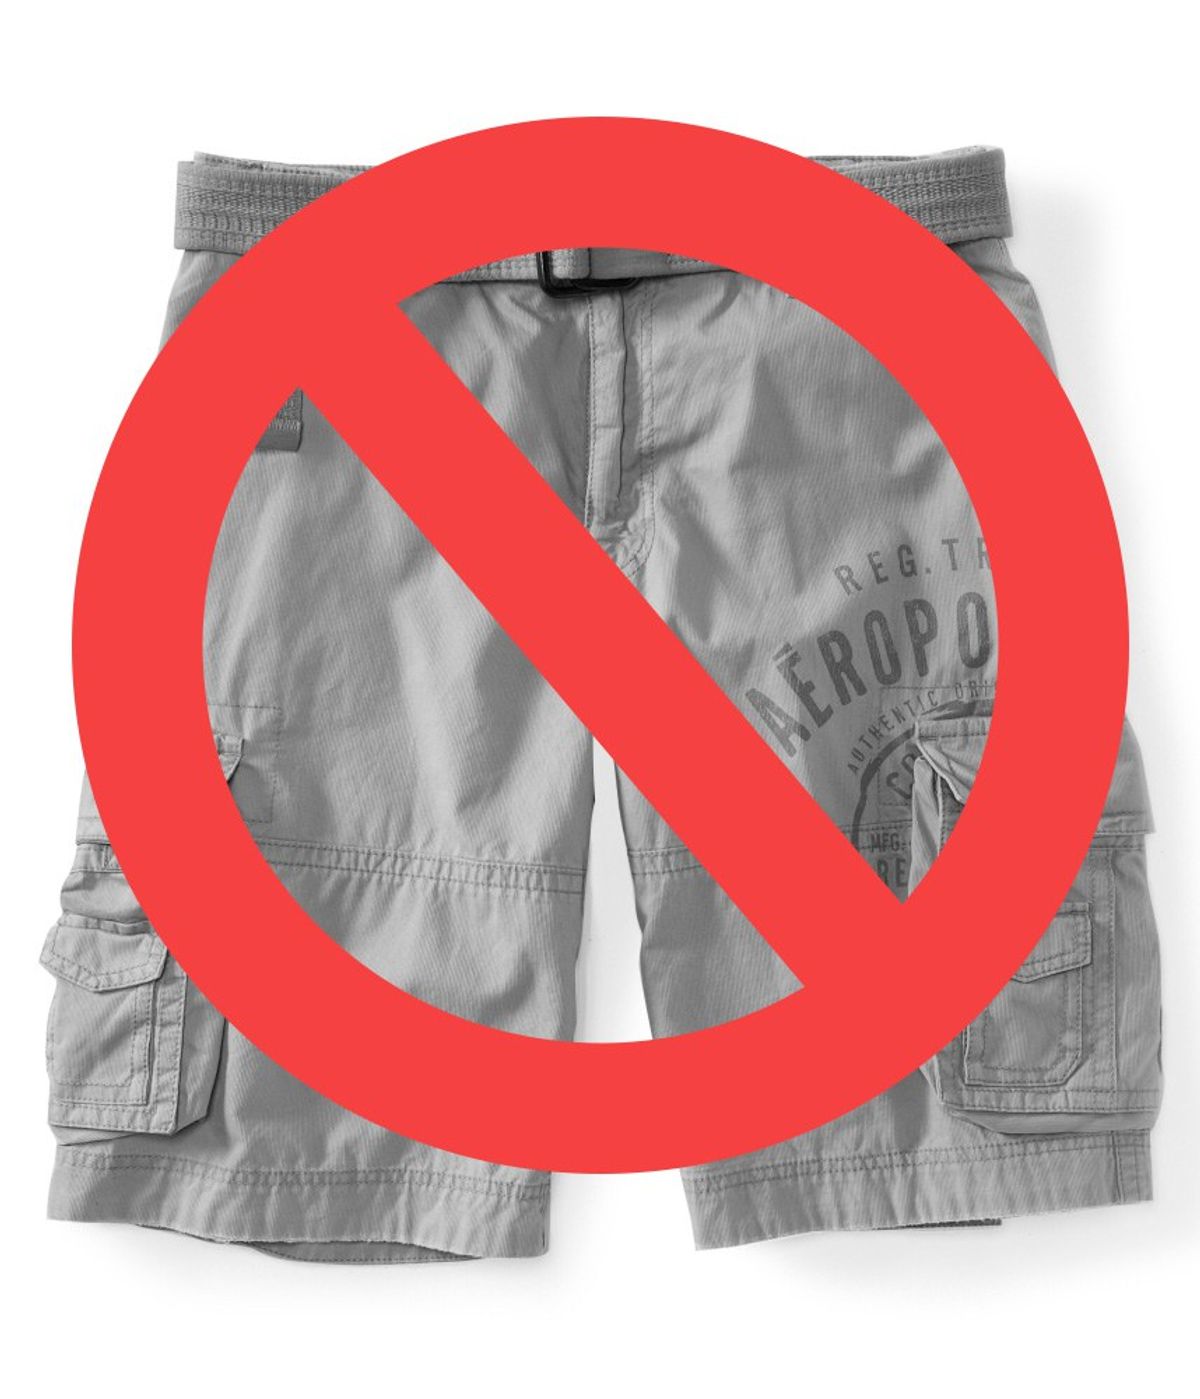 4 Reasons Why You Should Burn Your Cargo Shorts